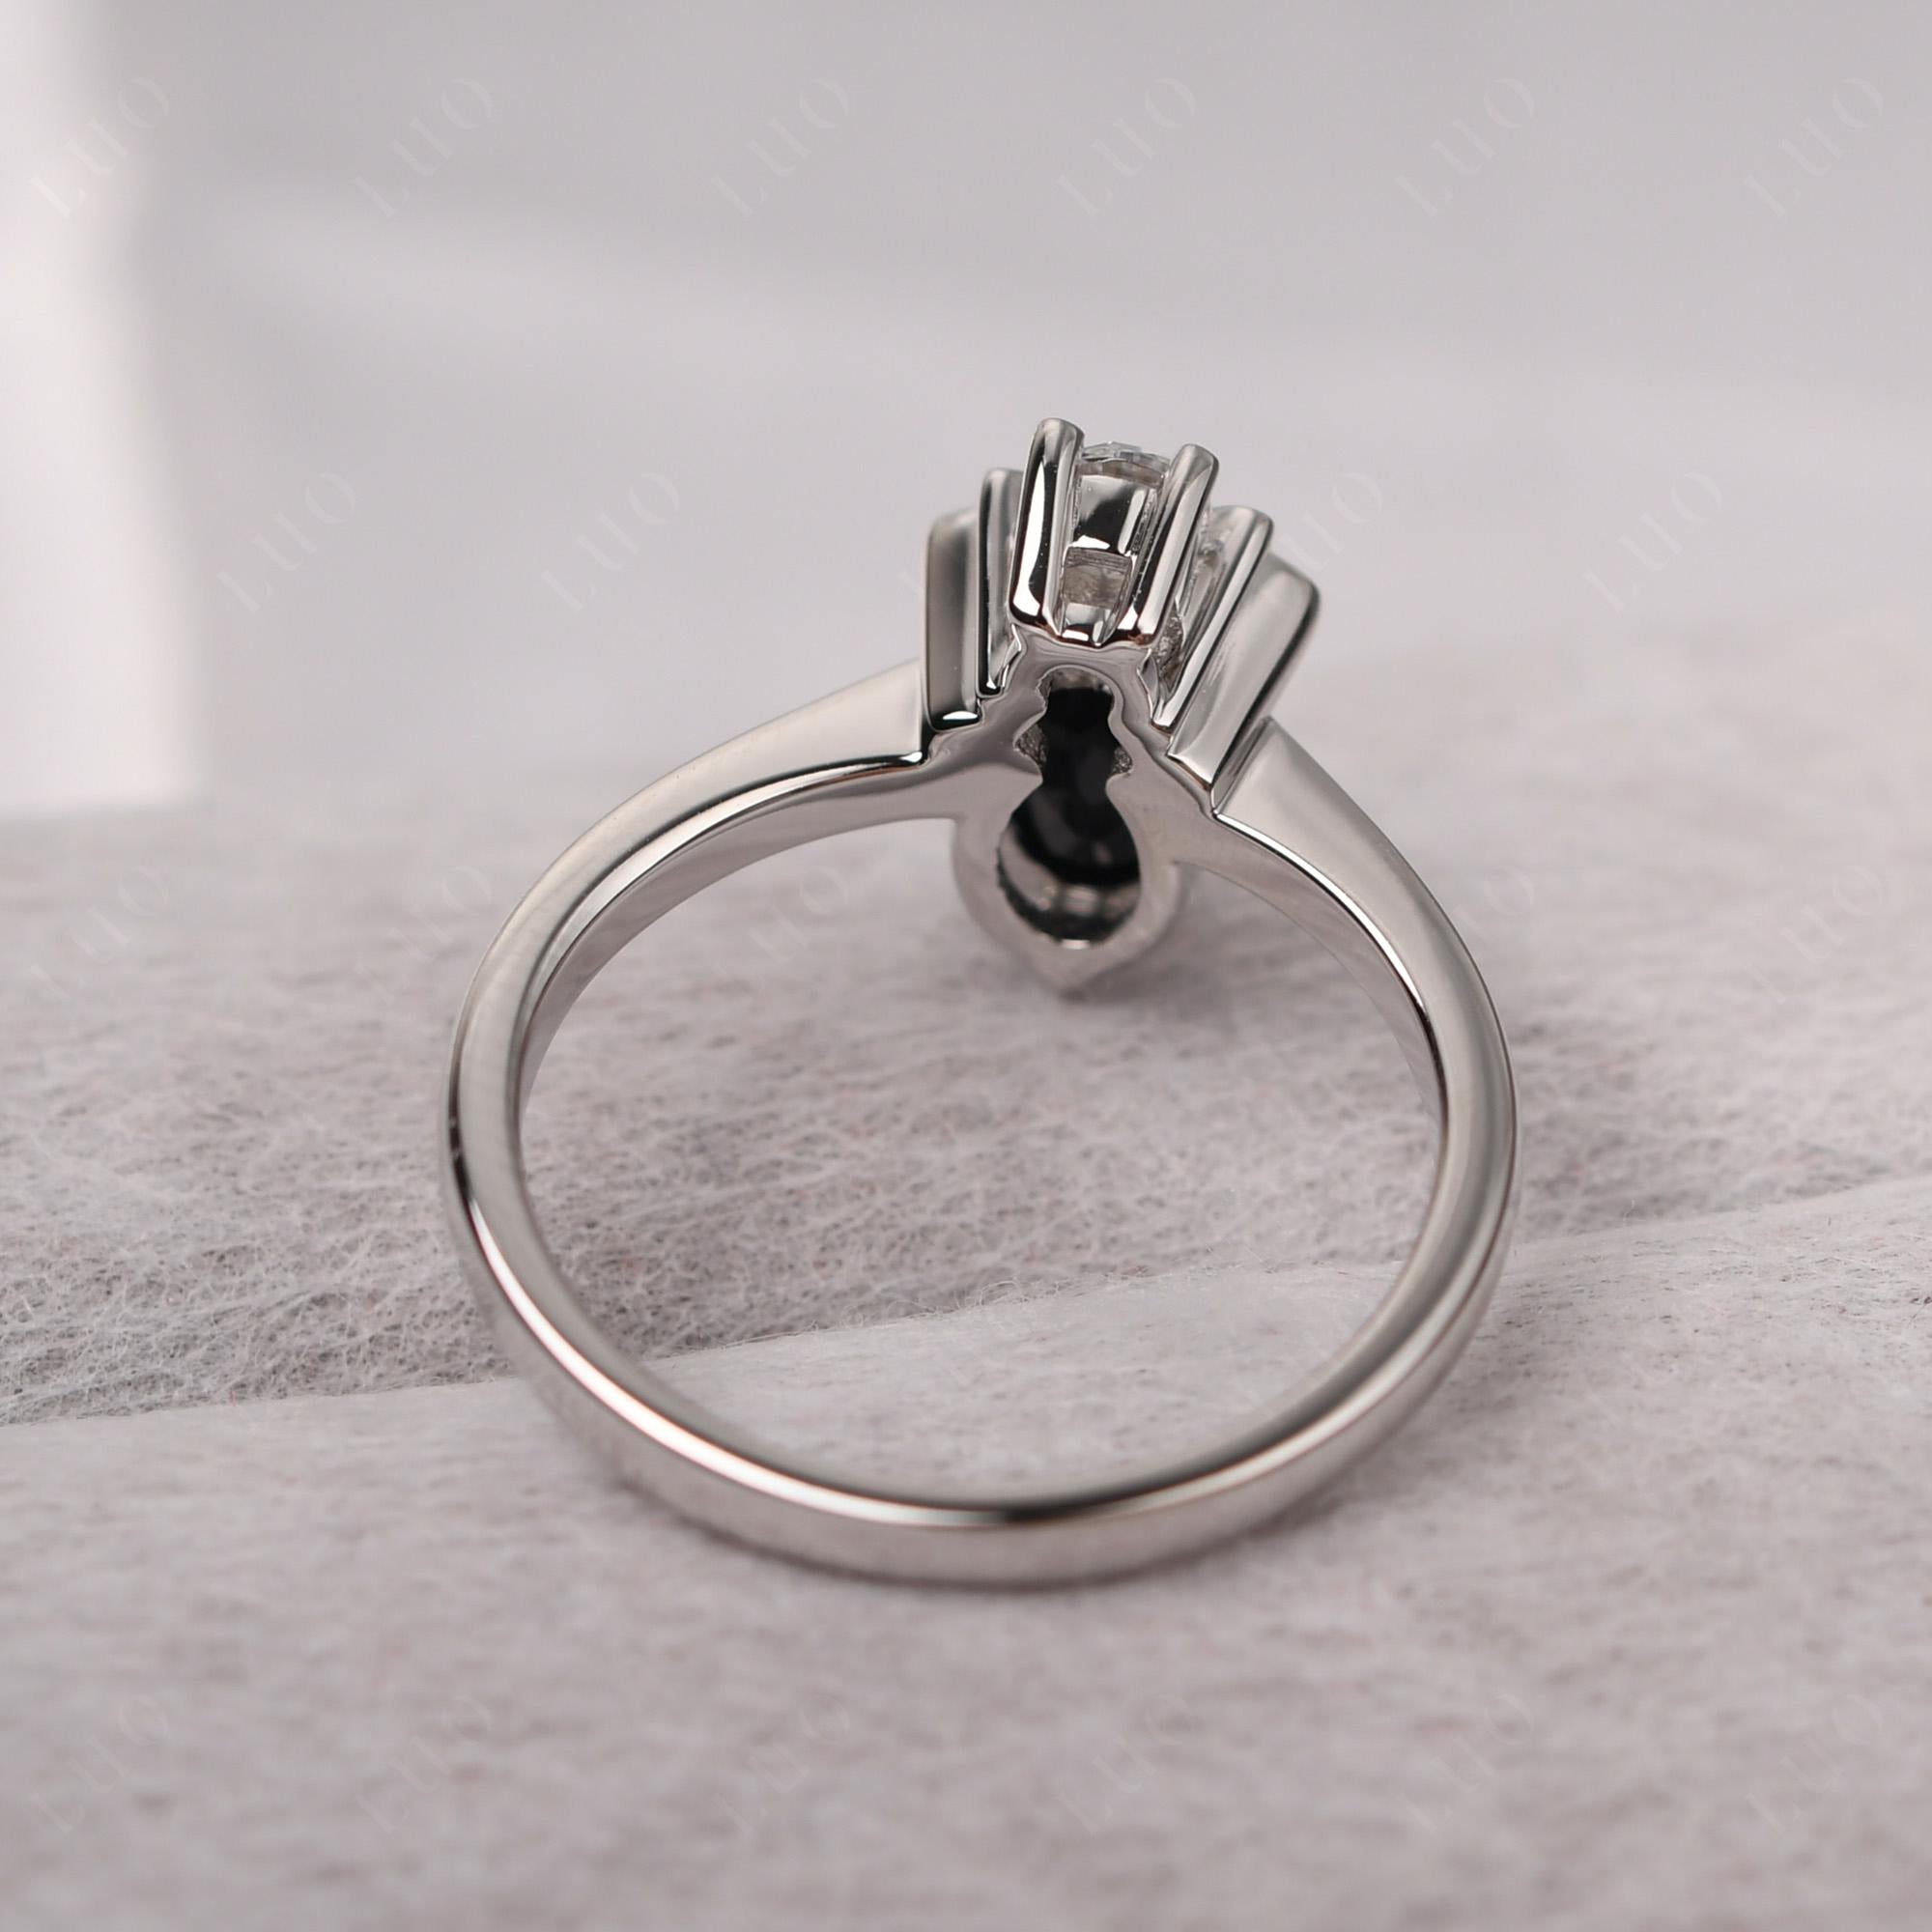 Black Stone Nature Inspired Bee Ring - LUO Jewelry